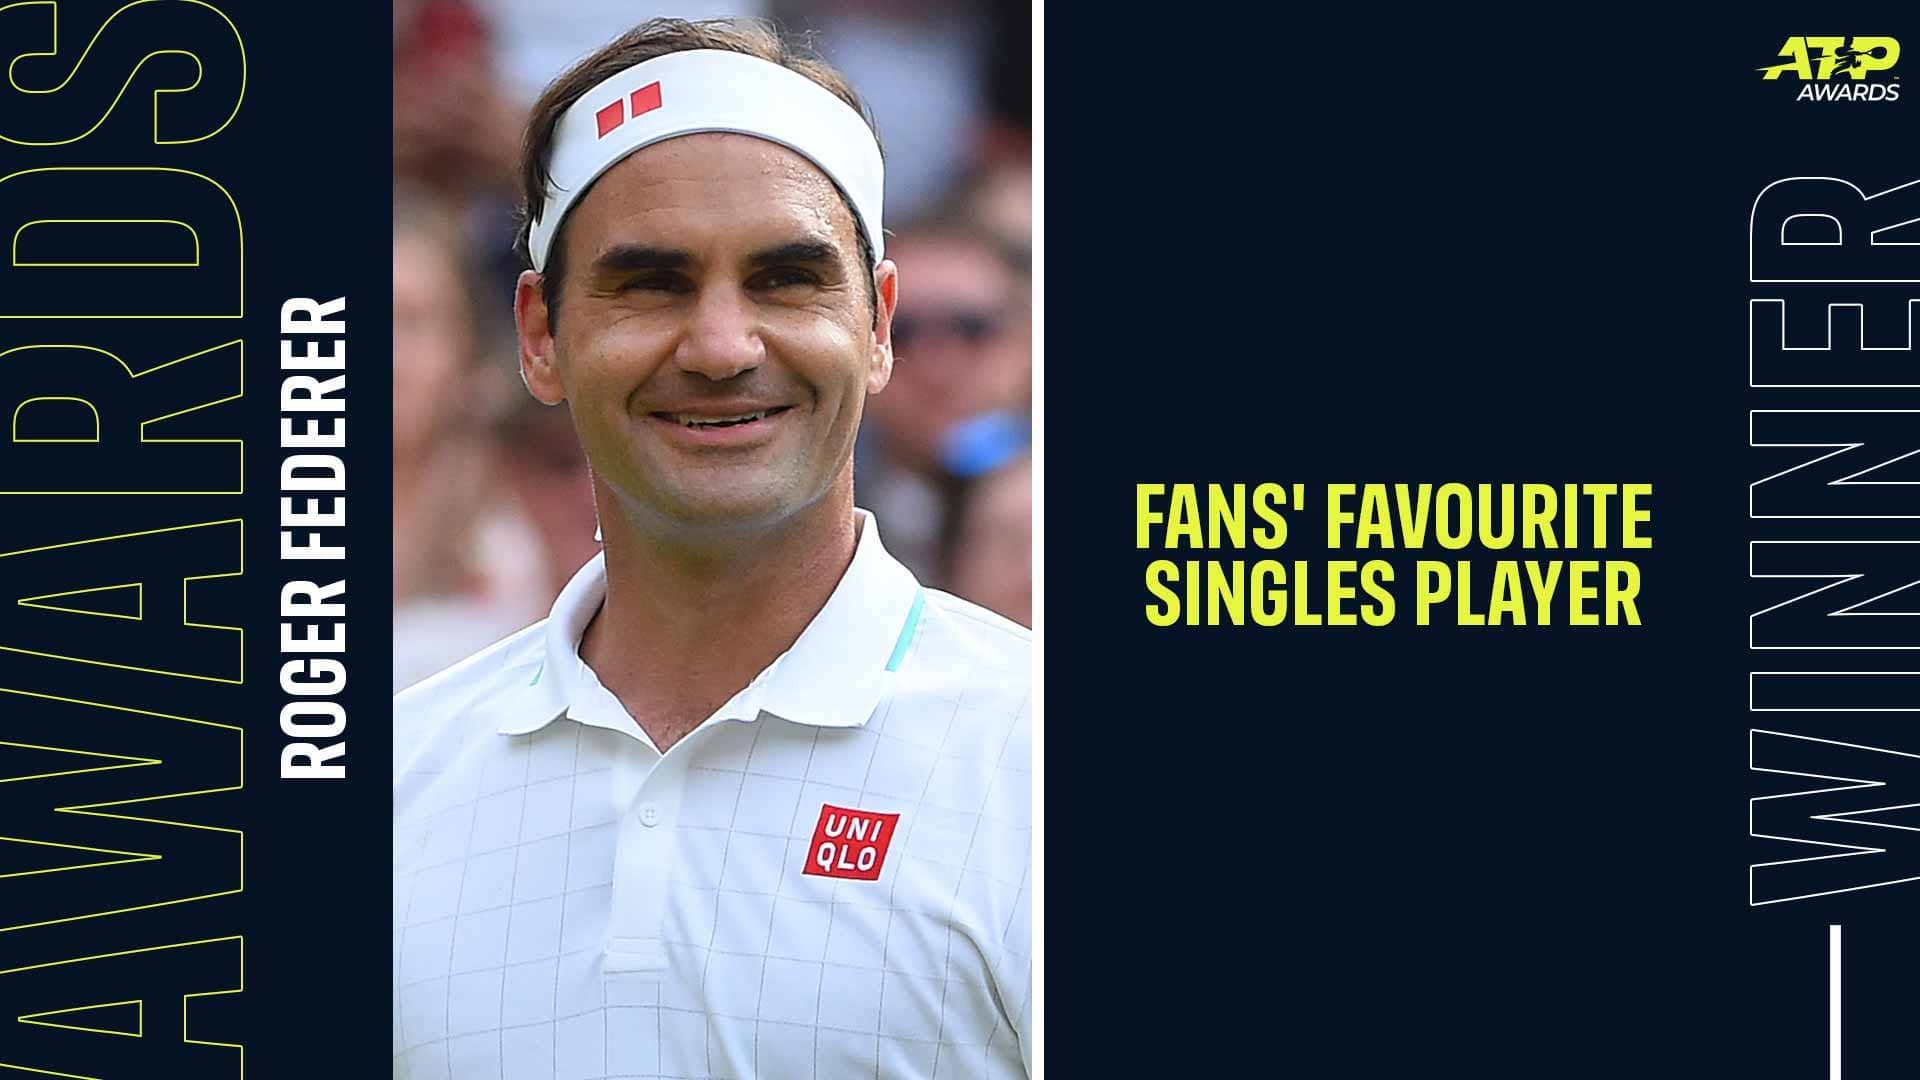 Roger Federer has been voted as Fans' Favourite singles player in the 2021 ATP Awards. 